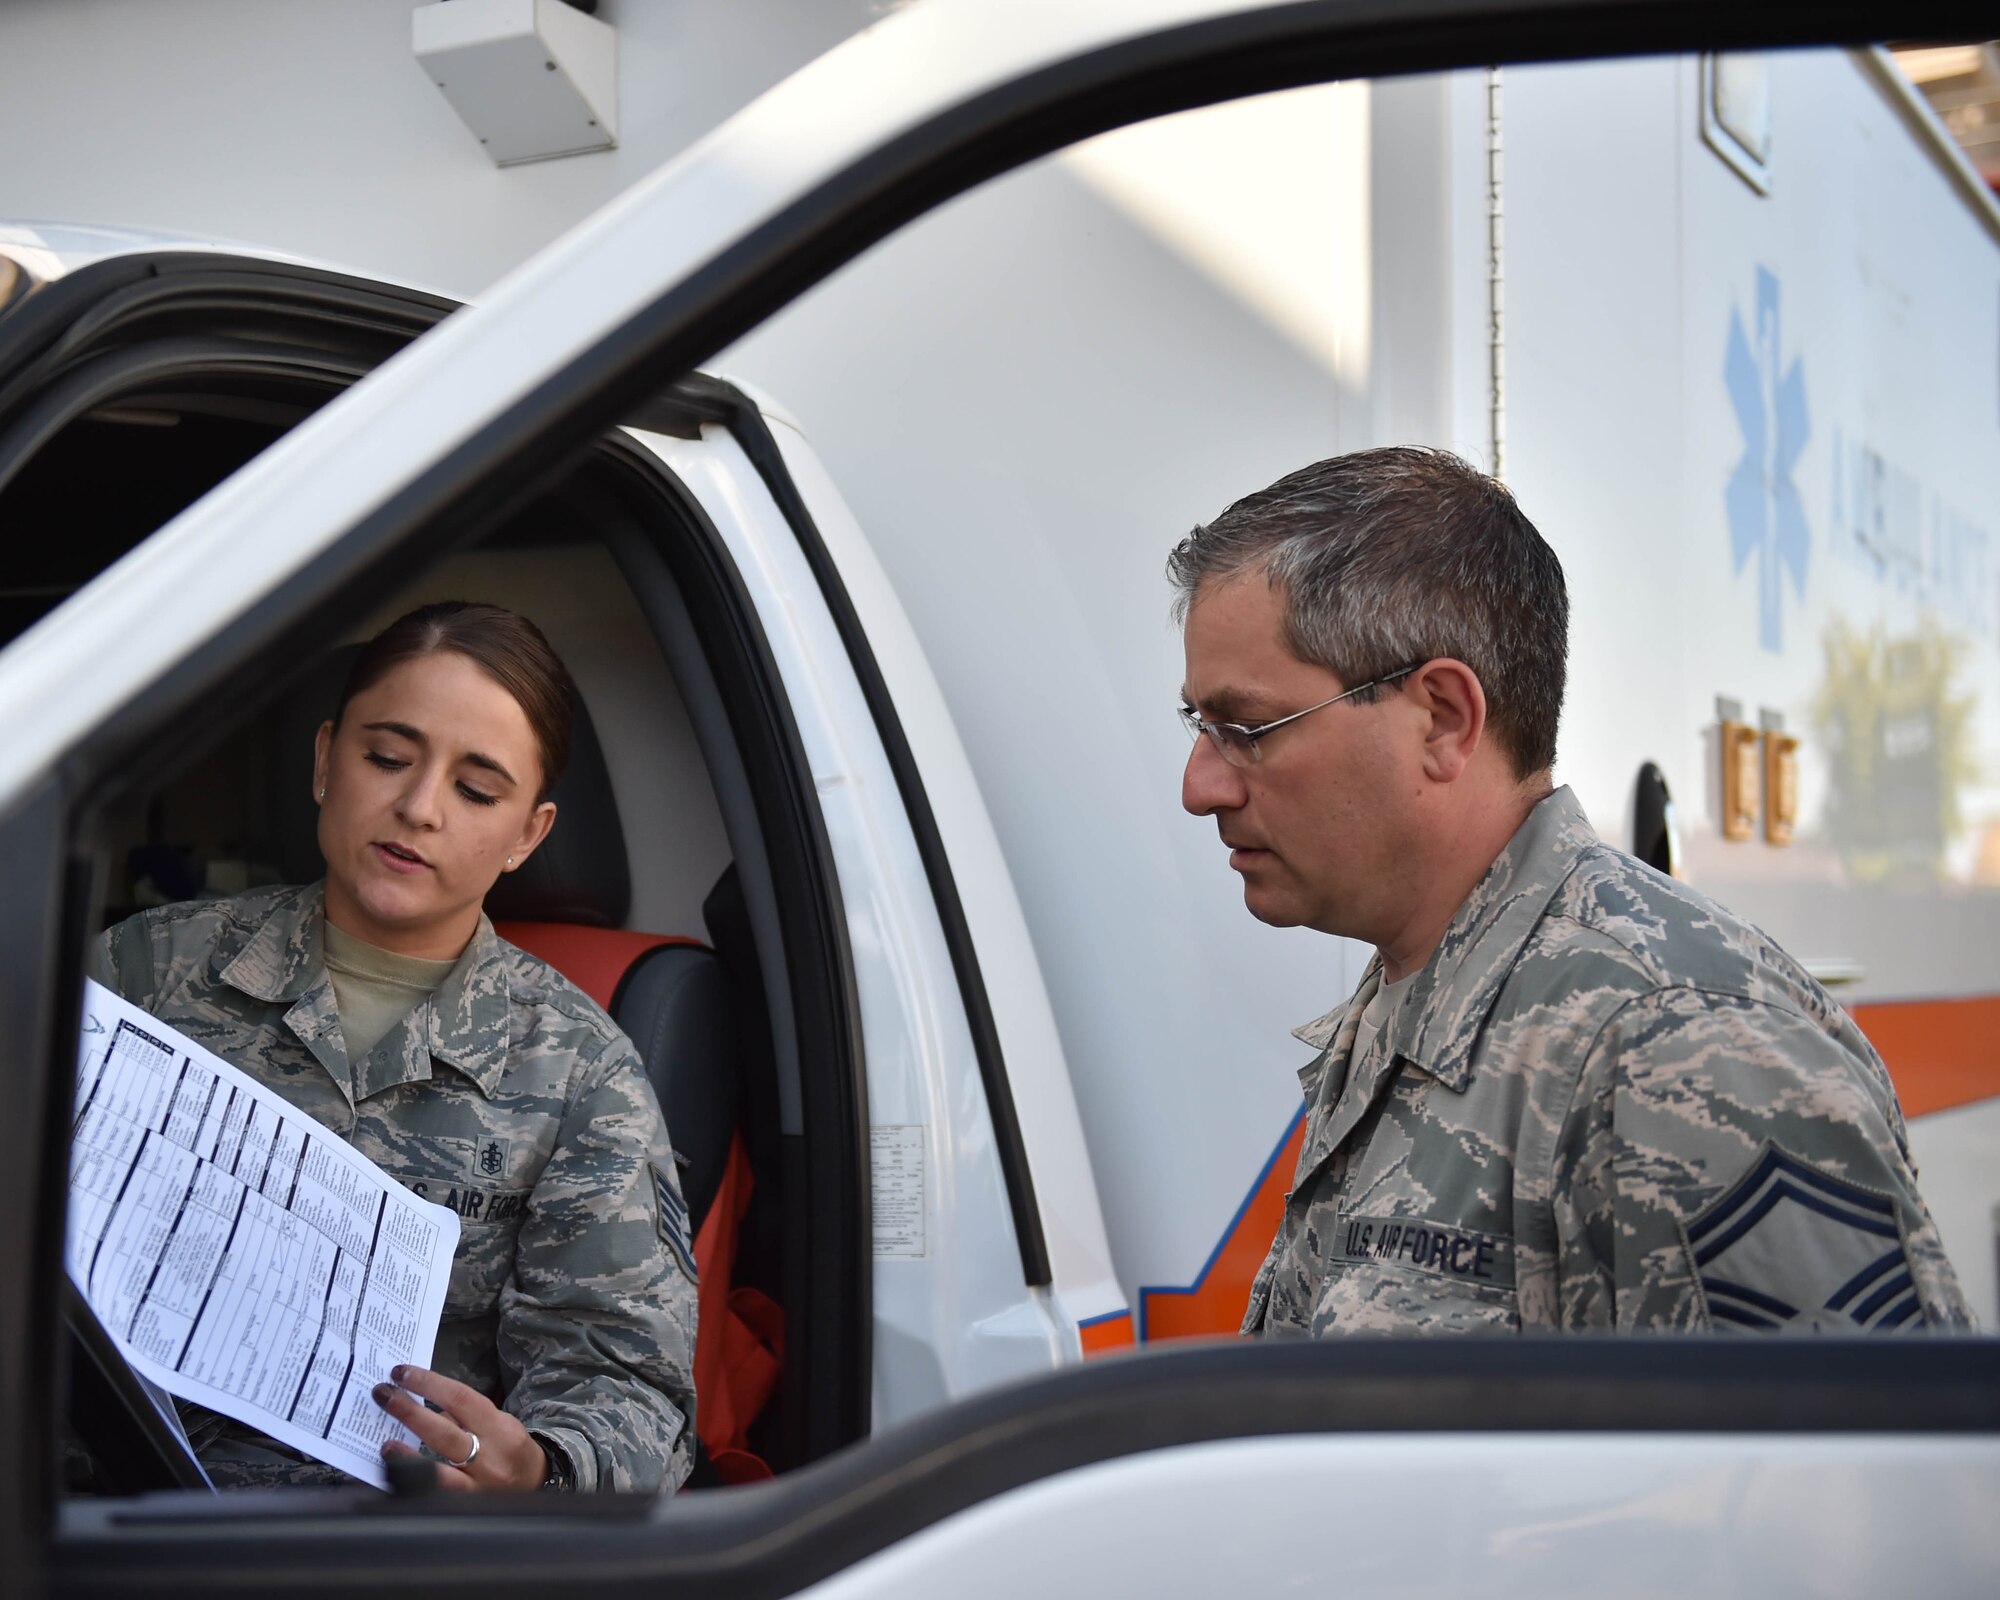 While spending a total of 15 days at Spangdahlem Air Base, 910th Airlift Wing Reserve Citizen Airmen received training that will better prepare them for deployment situations.